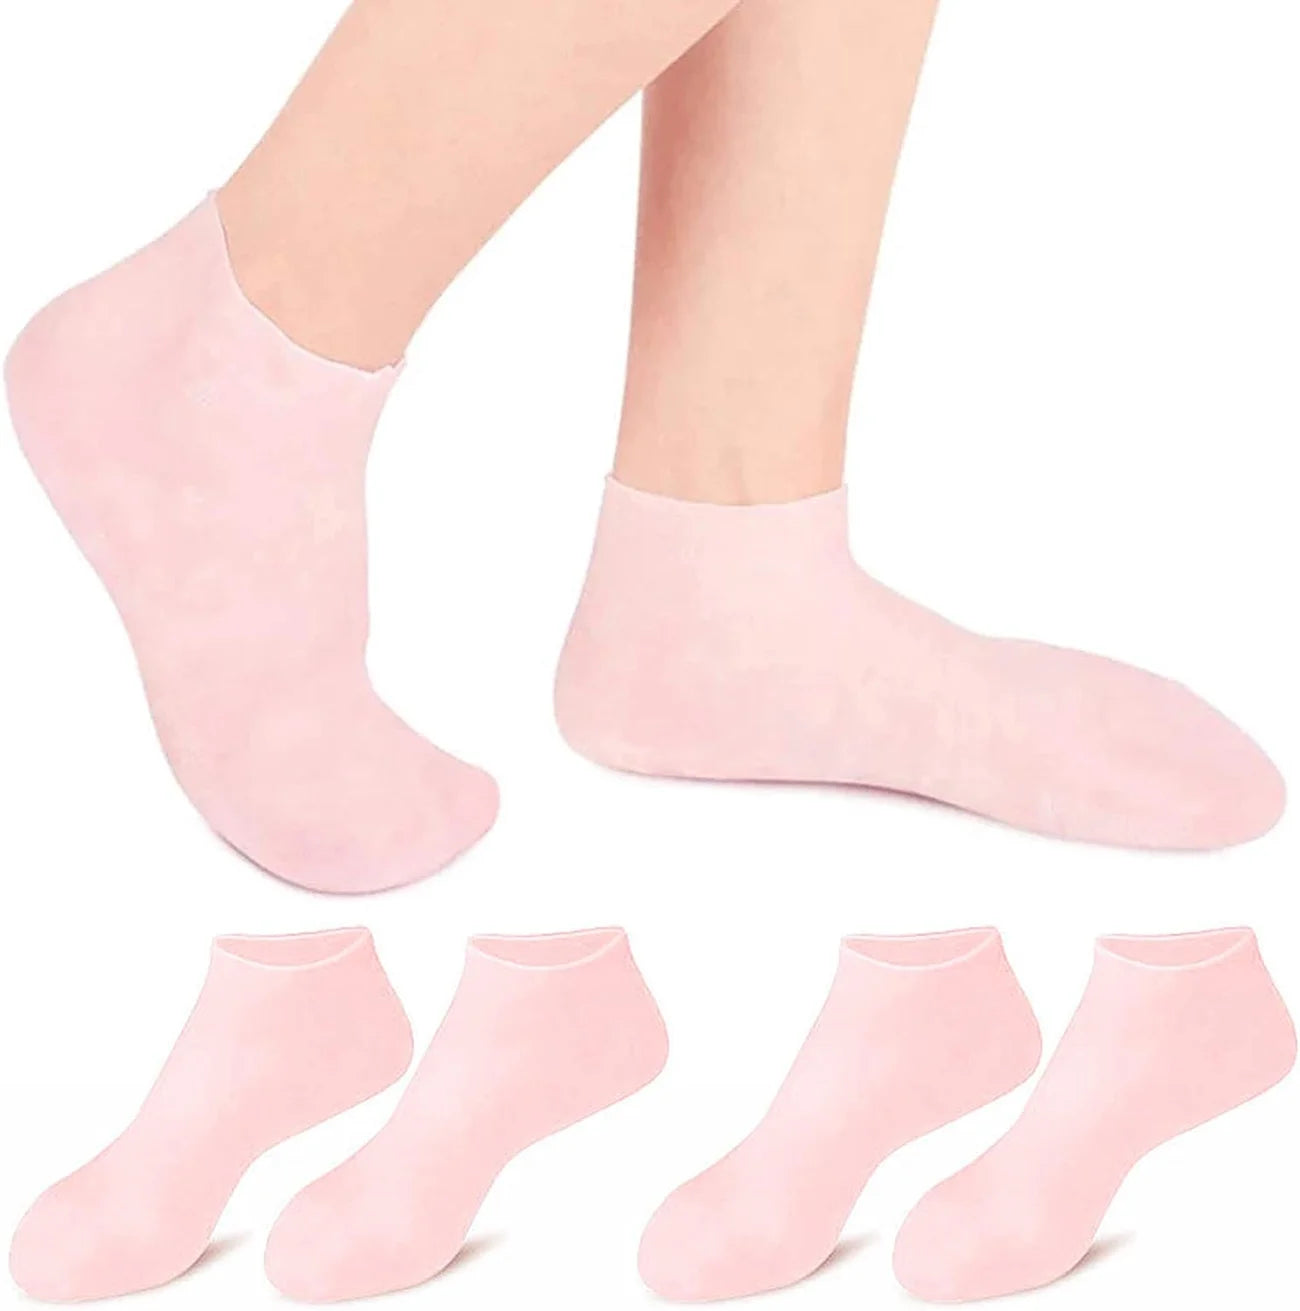 Silicone Gel Heel Pad Socks For Orthopaedic Use, Flexible at Best Price in  Ahmedabad | Vagh Trader Pvt. Ltd.